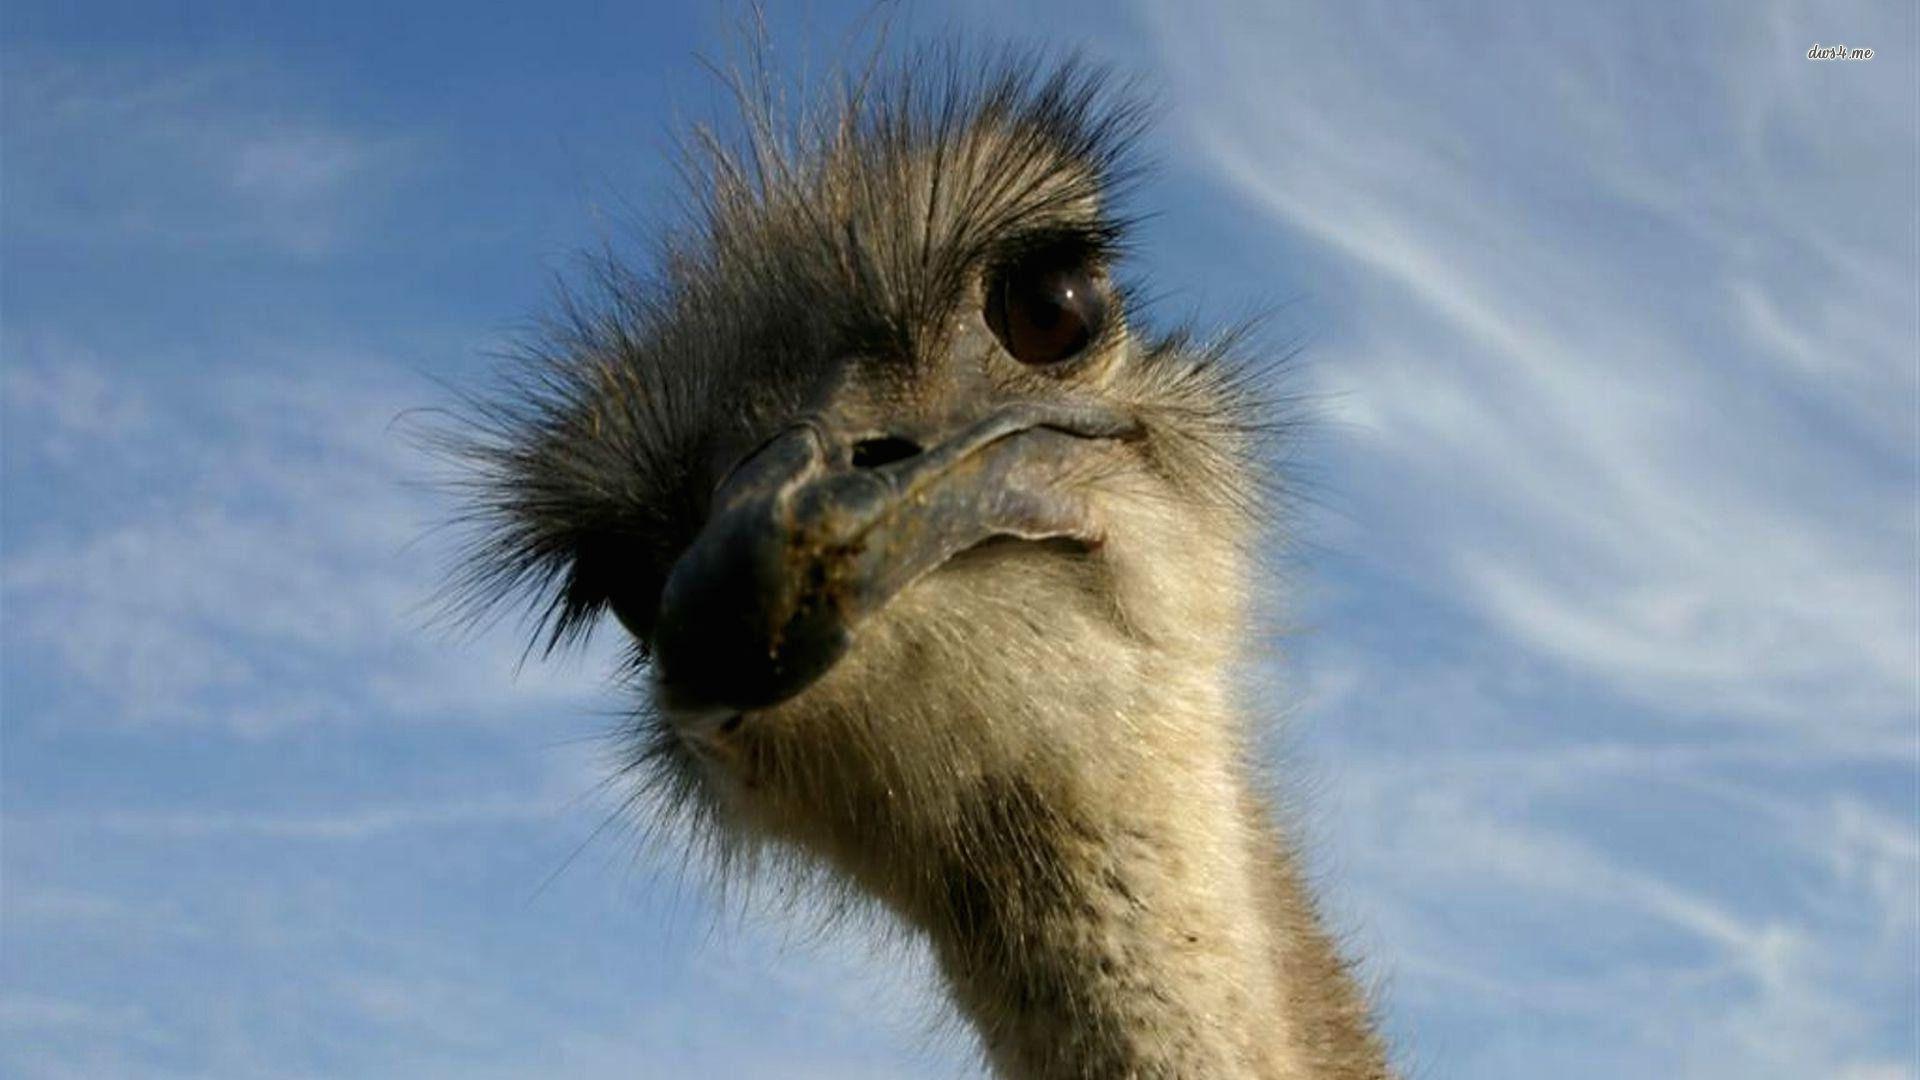 Funny looking Ostrich wallpaperx1080